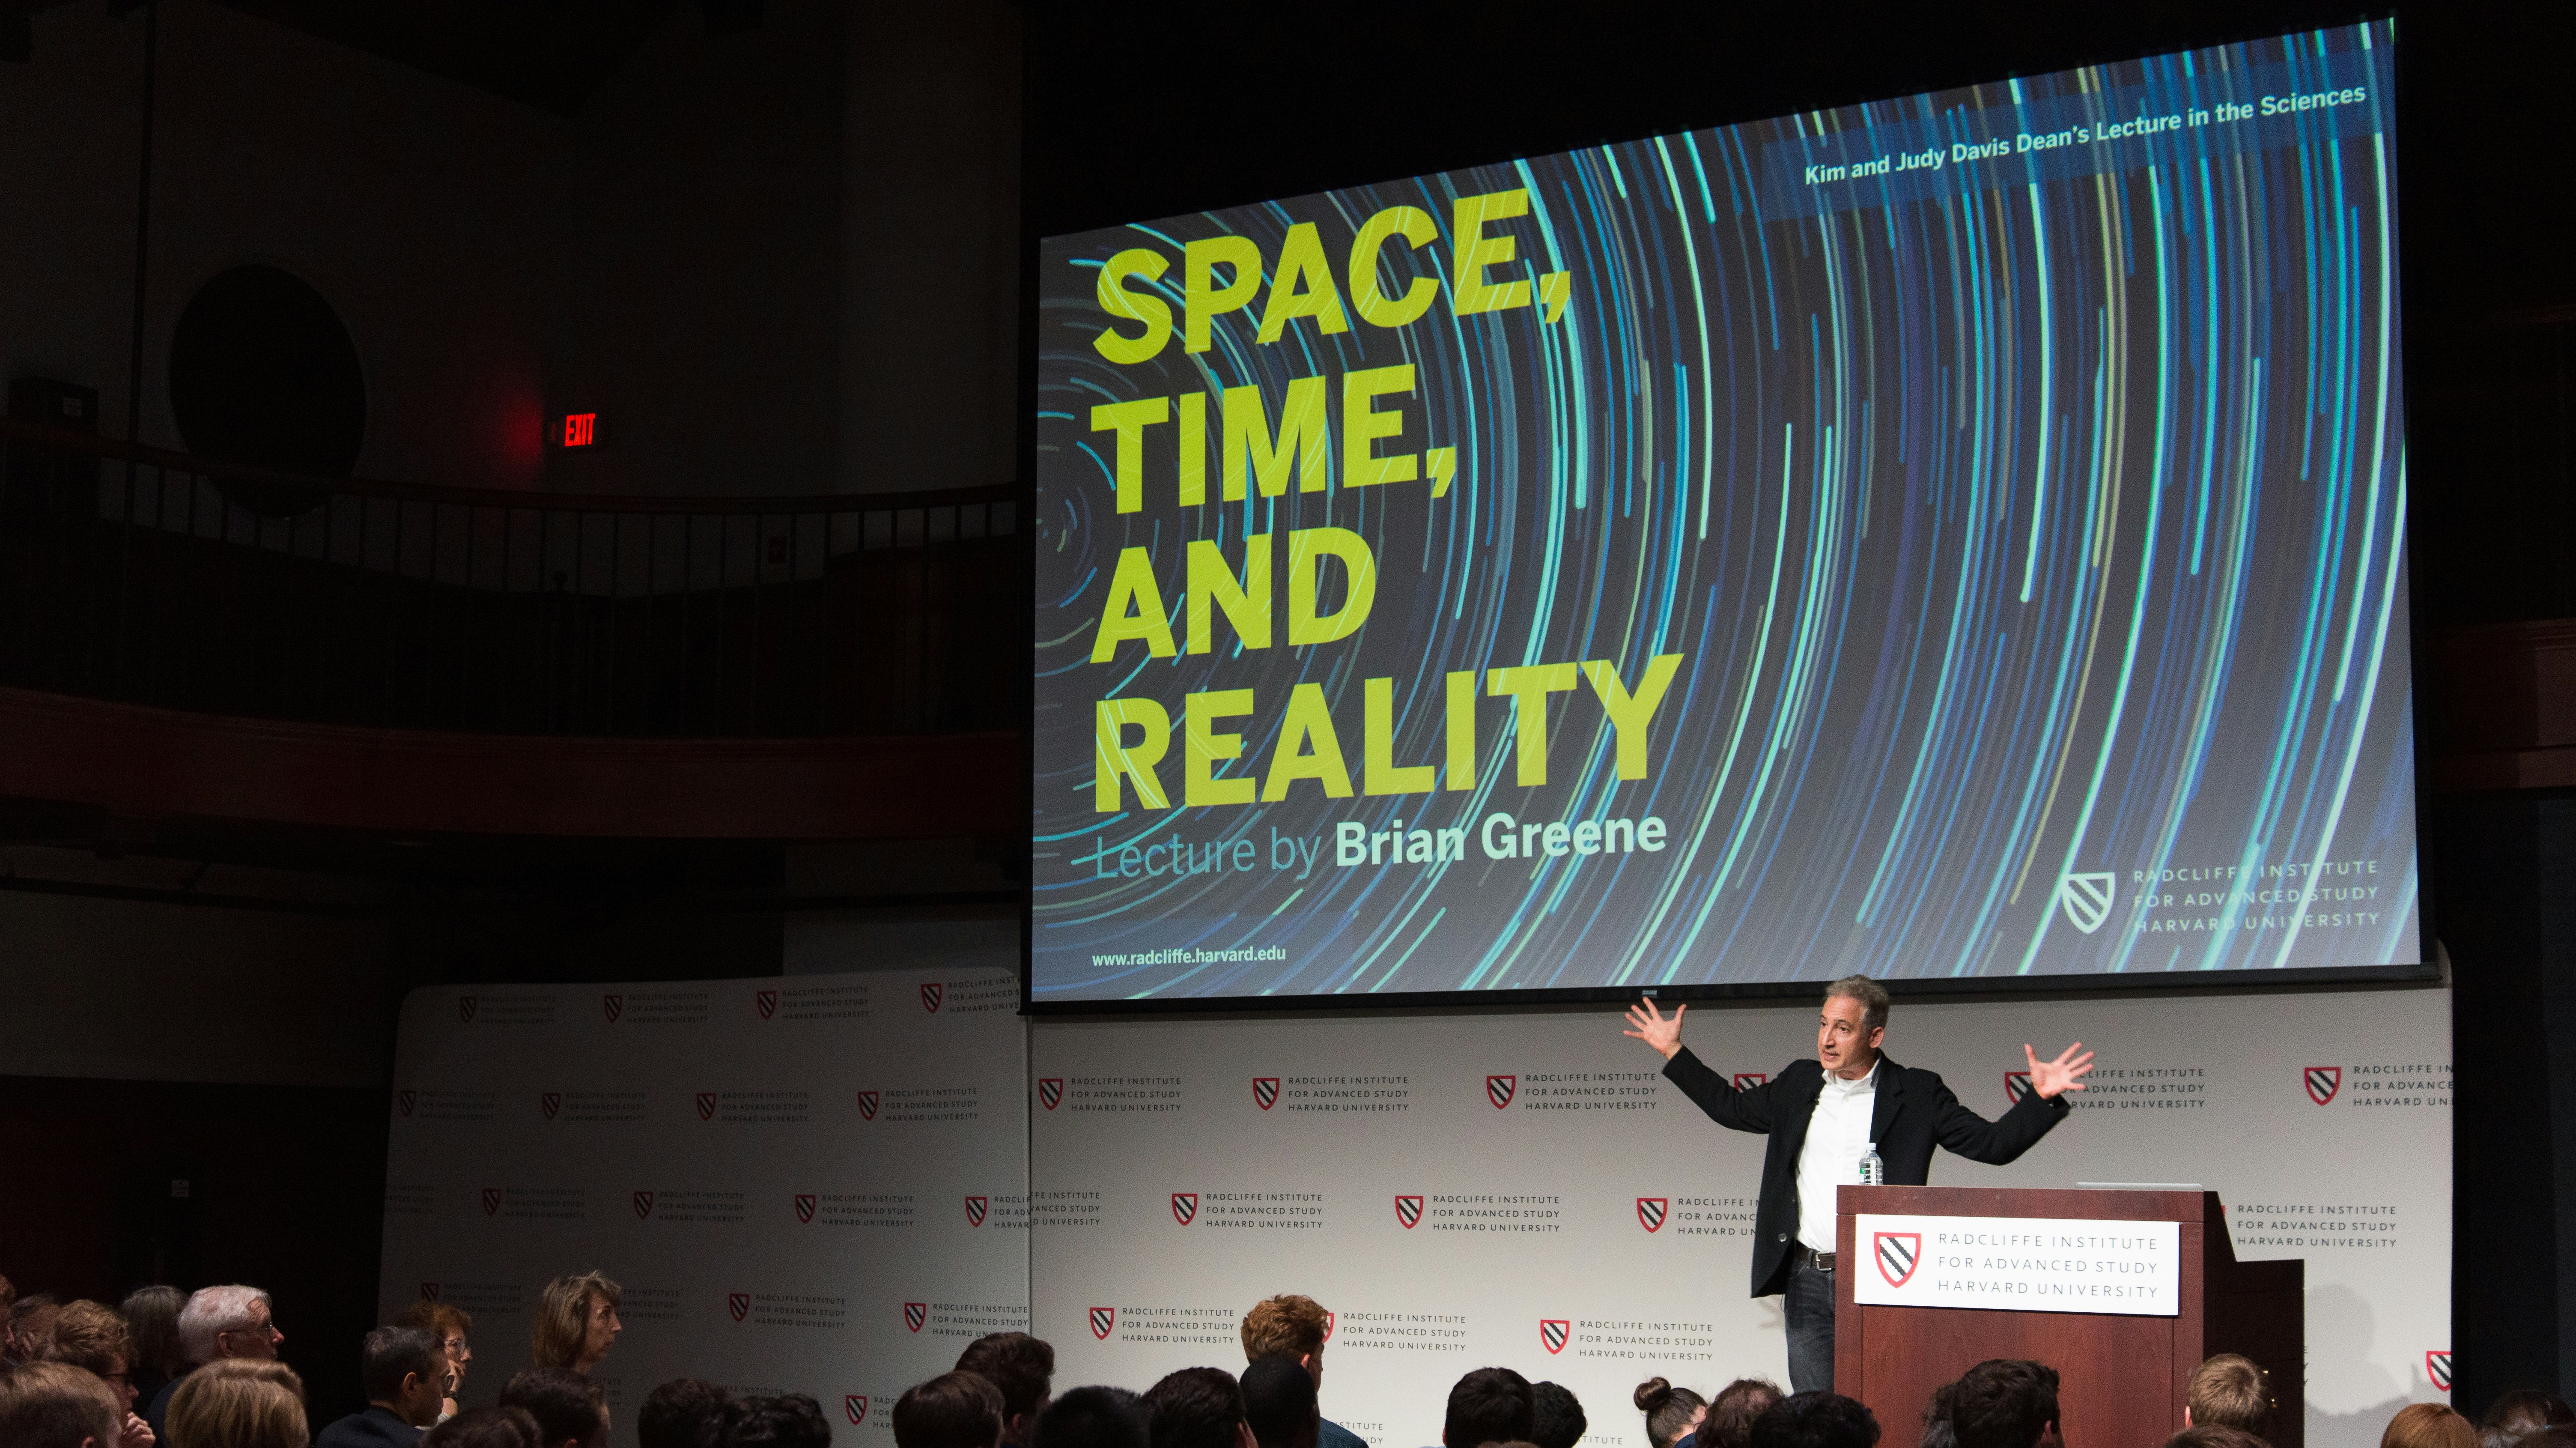 Brian Greene presenting lecture on "Space, Time, and Reality" at Radcliffe.